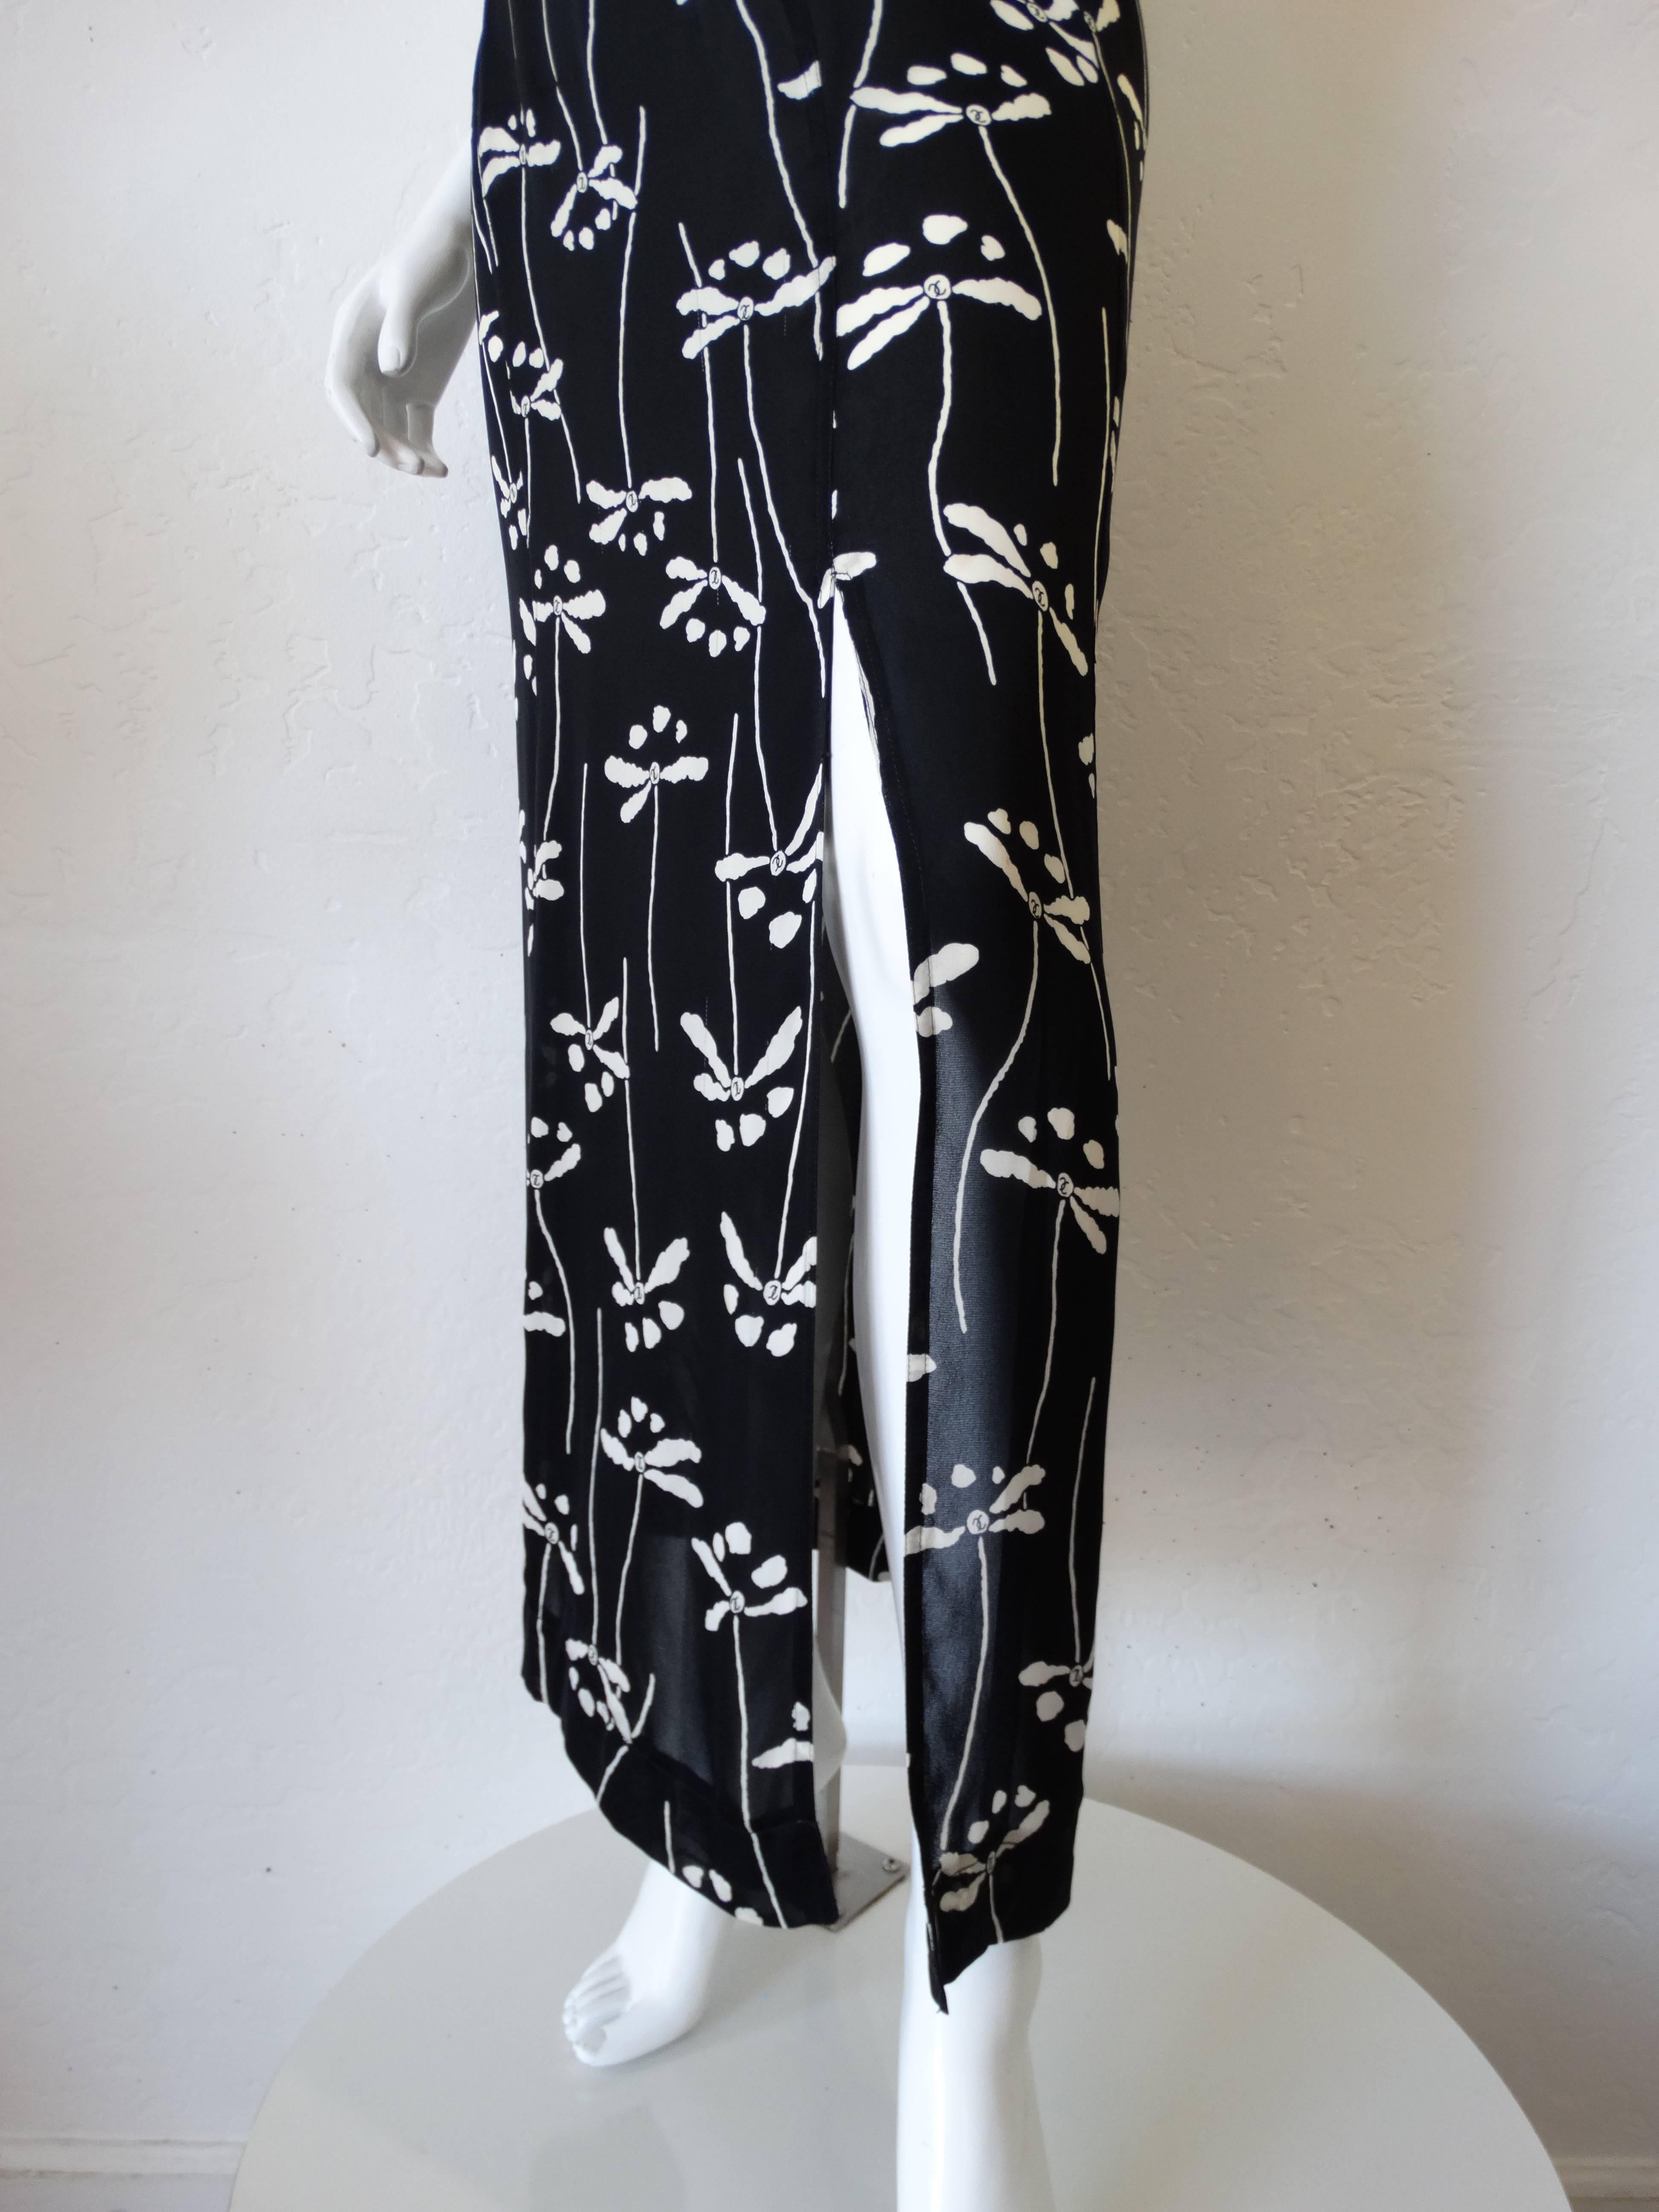 Rare 1990s Chanel Black and White Floral Skirt 3